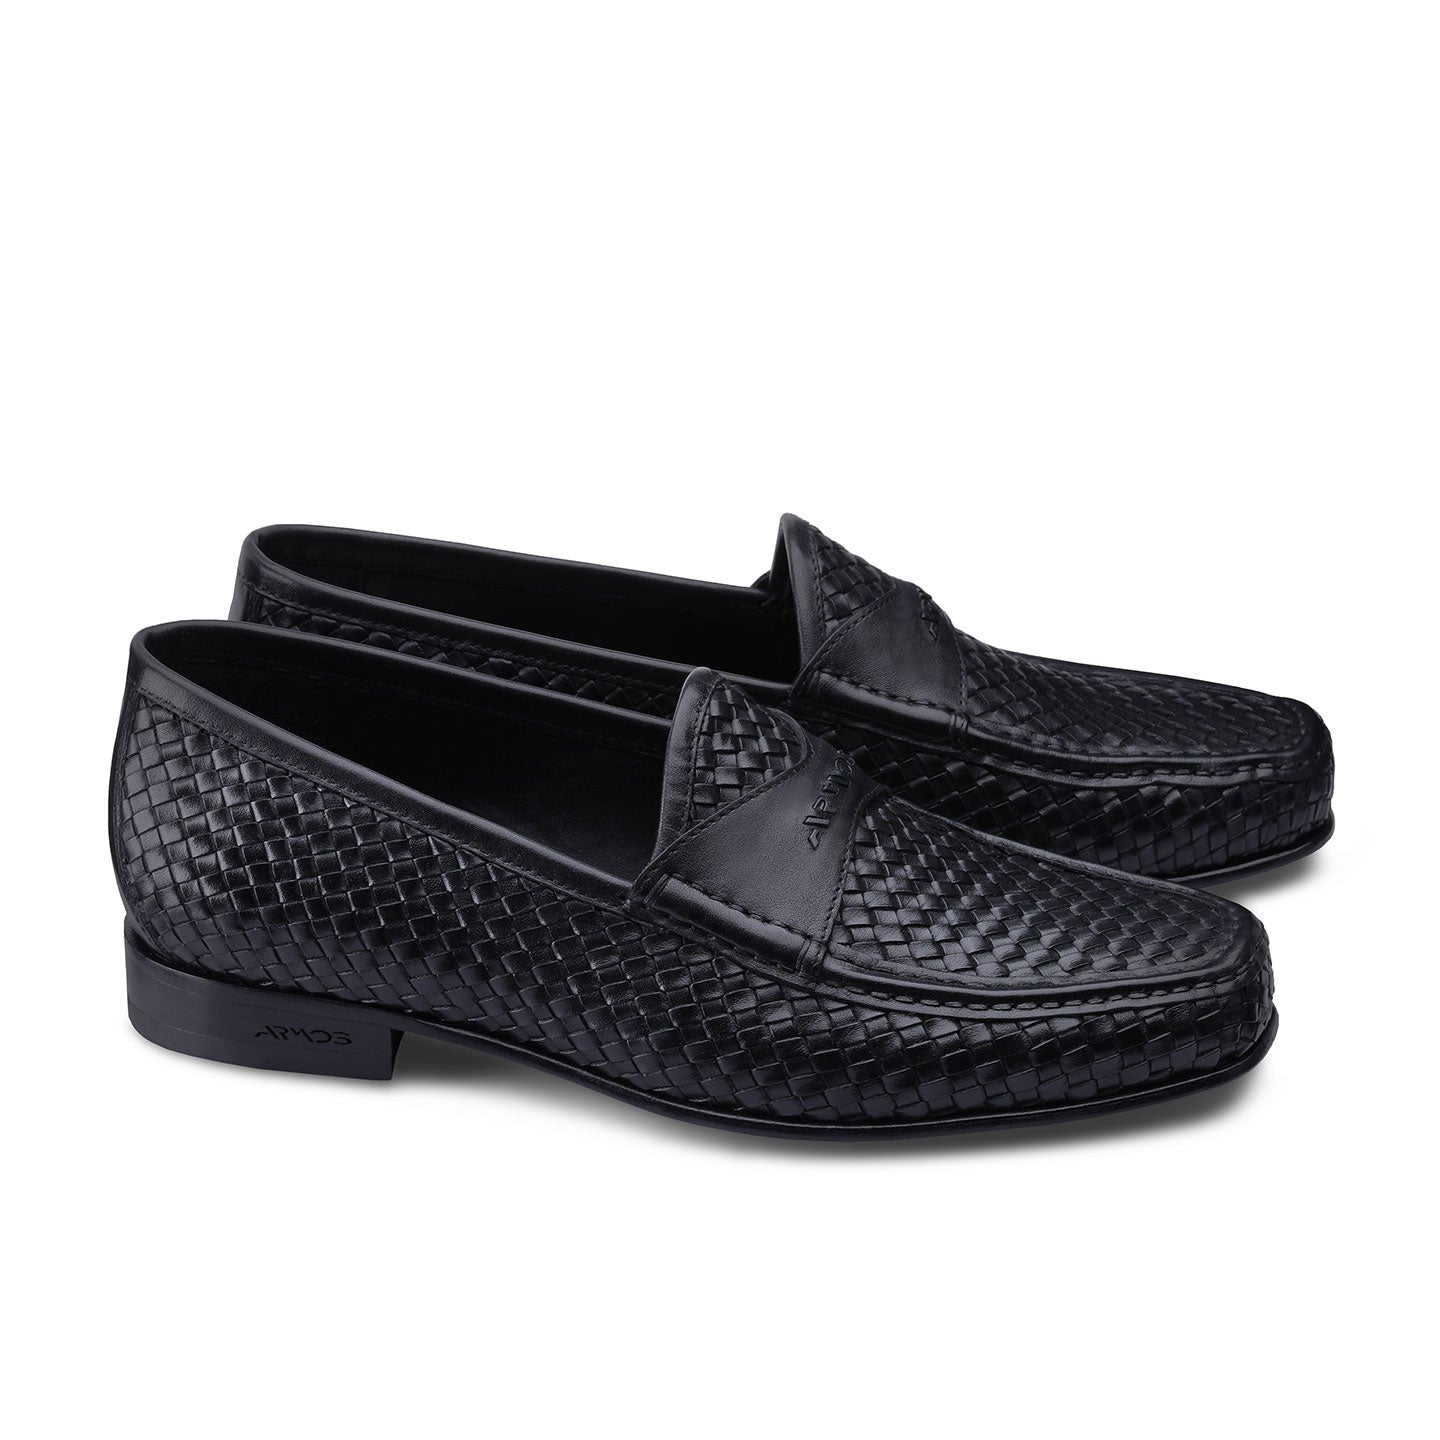 Woven black loafers